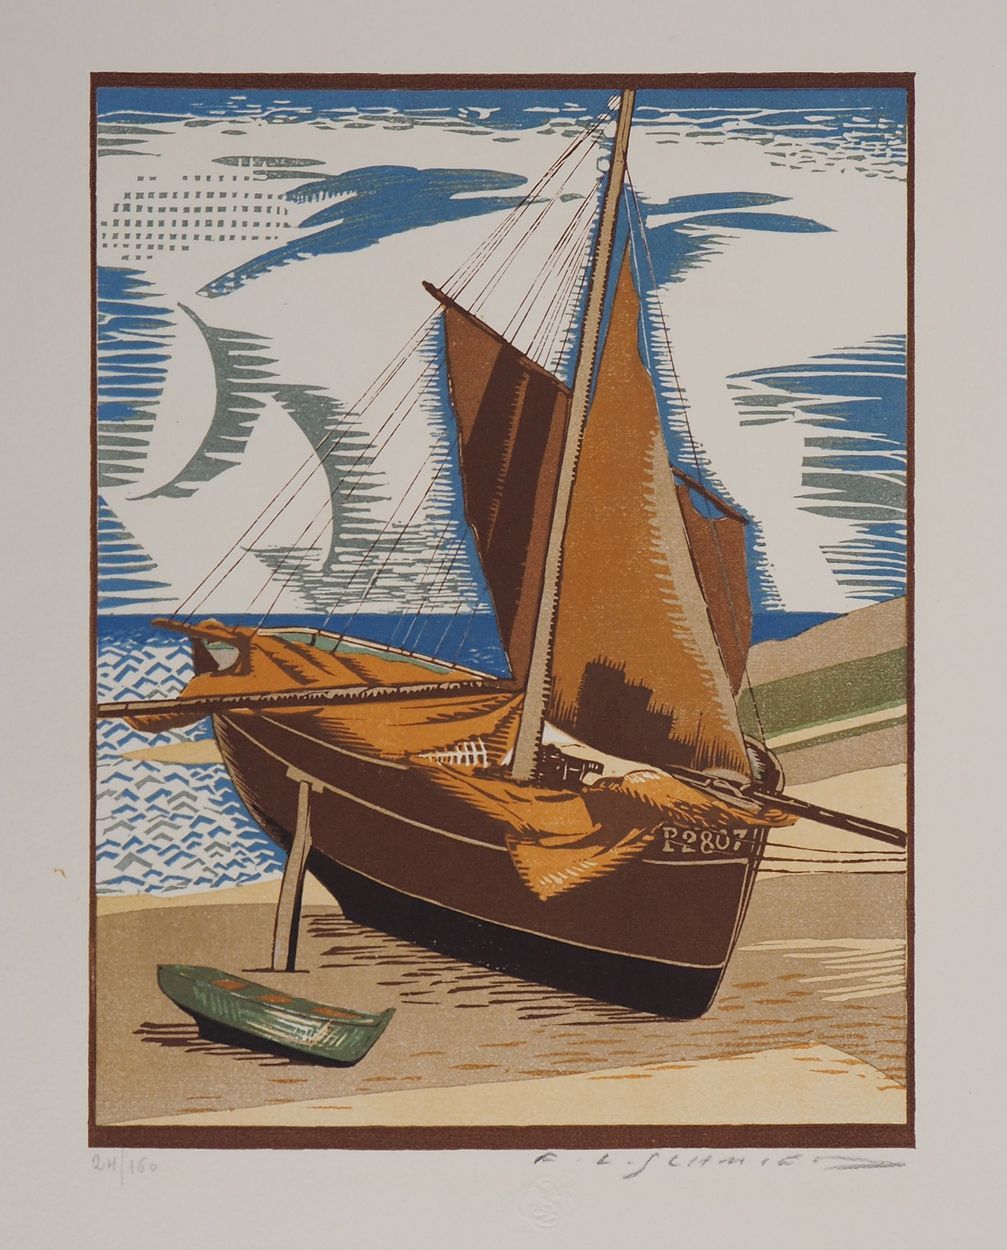 François-Louis Schmied François-Louis SCHMIED

Brittany, boat on the beach, 1924&hellip;